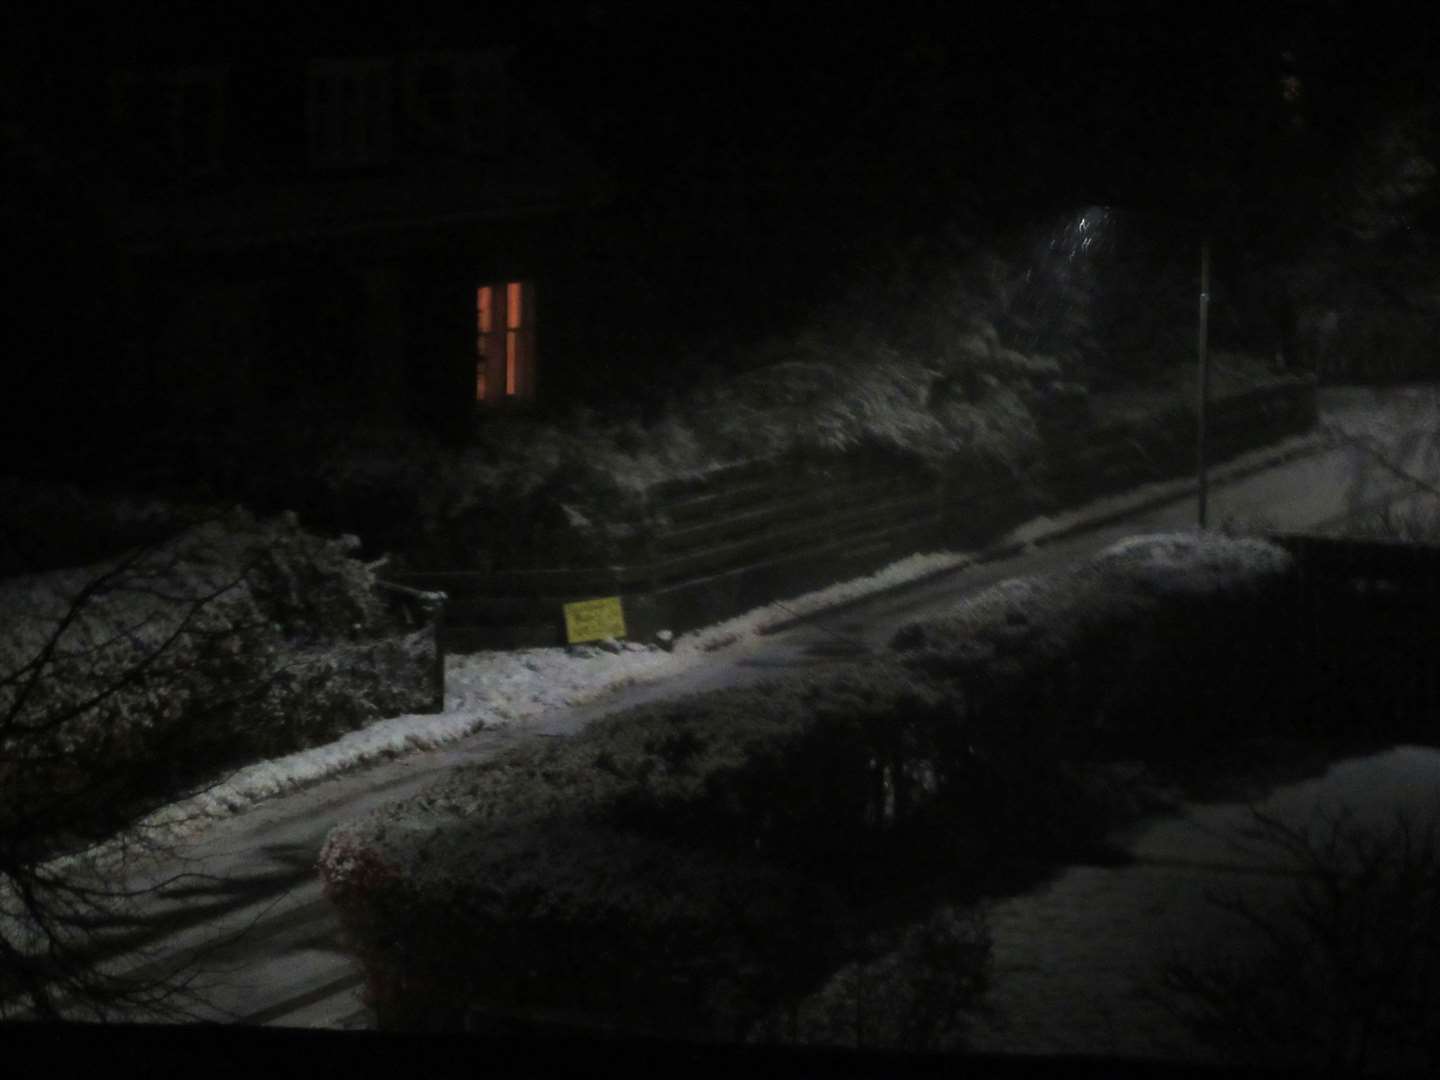 Badenoch 5pm: as the lights go on, the snow comes down